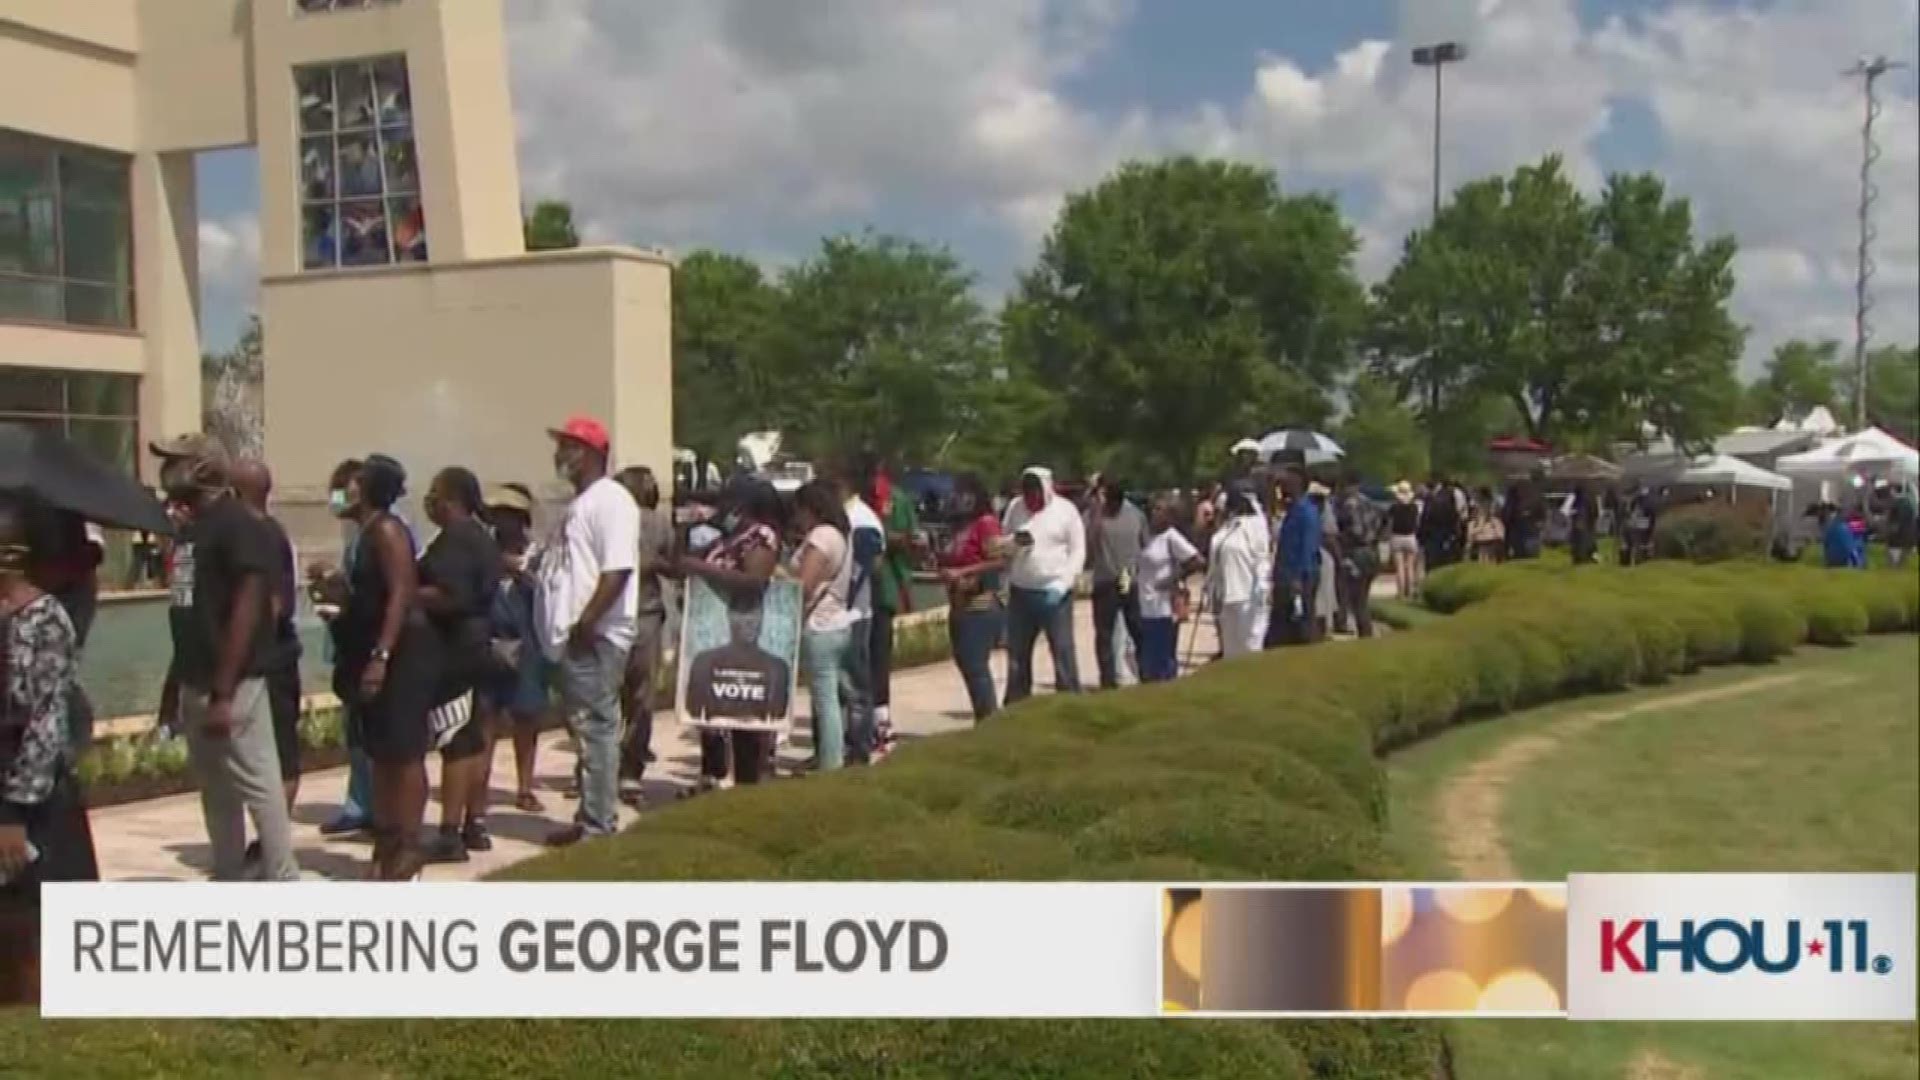 Visitors battled a dangerous heat wave to pay their respects to George Floyd.